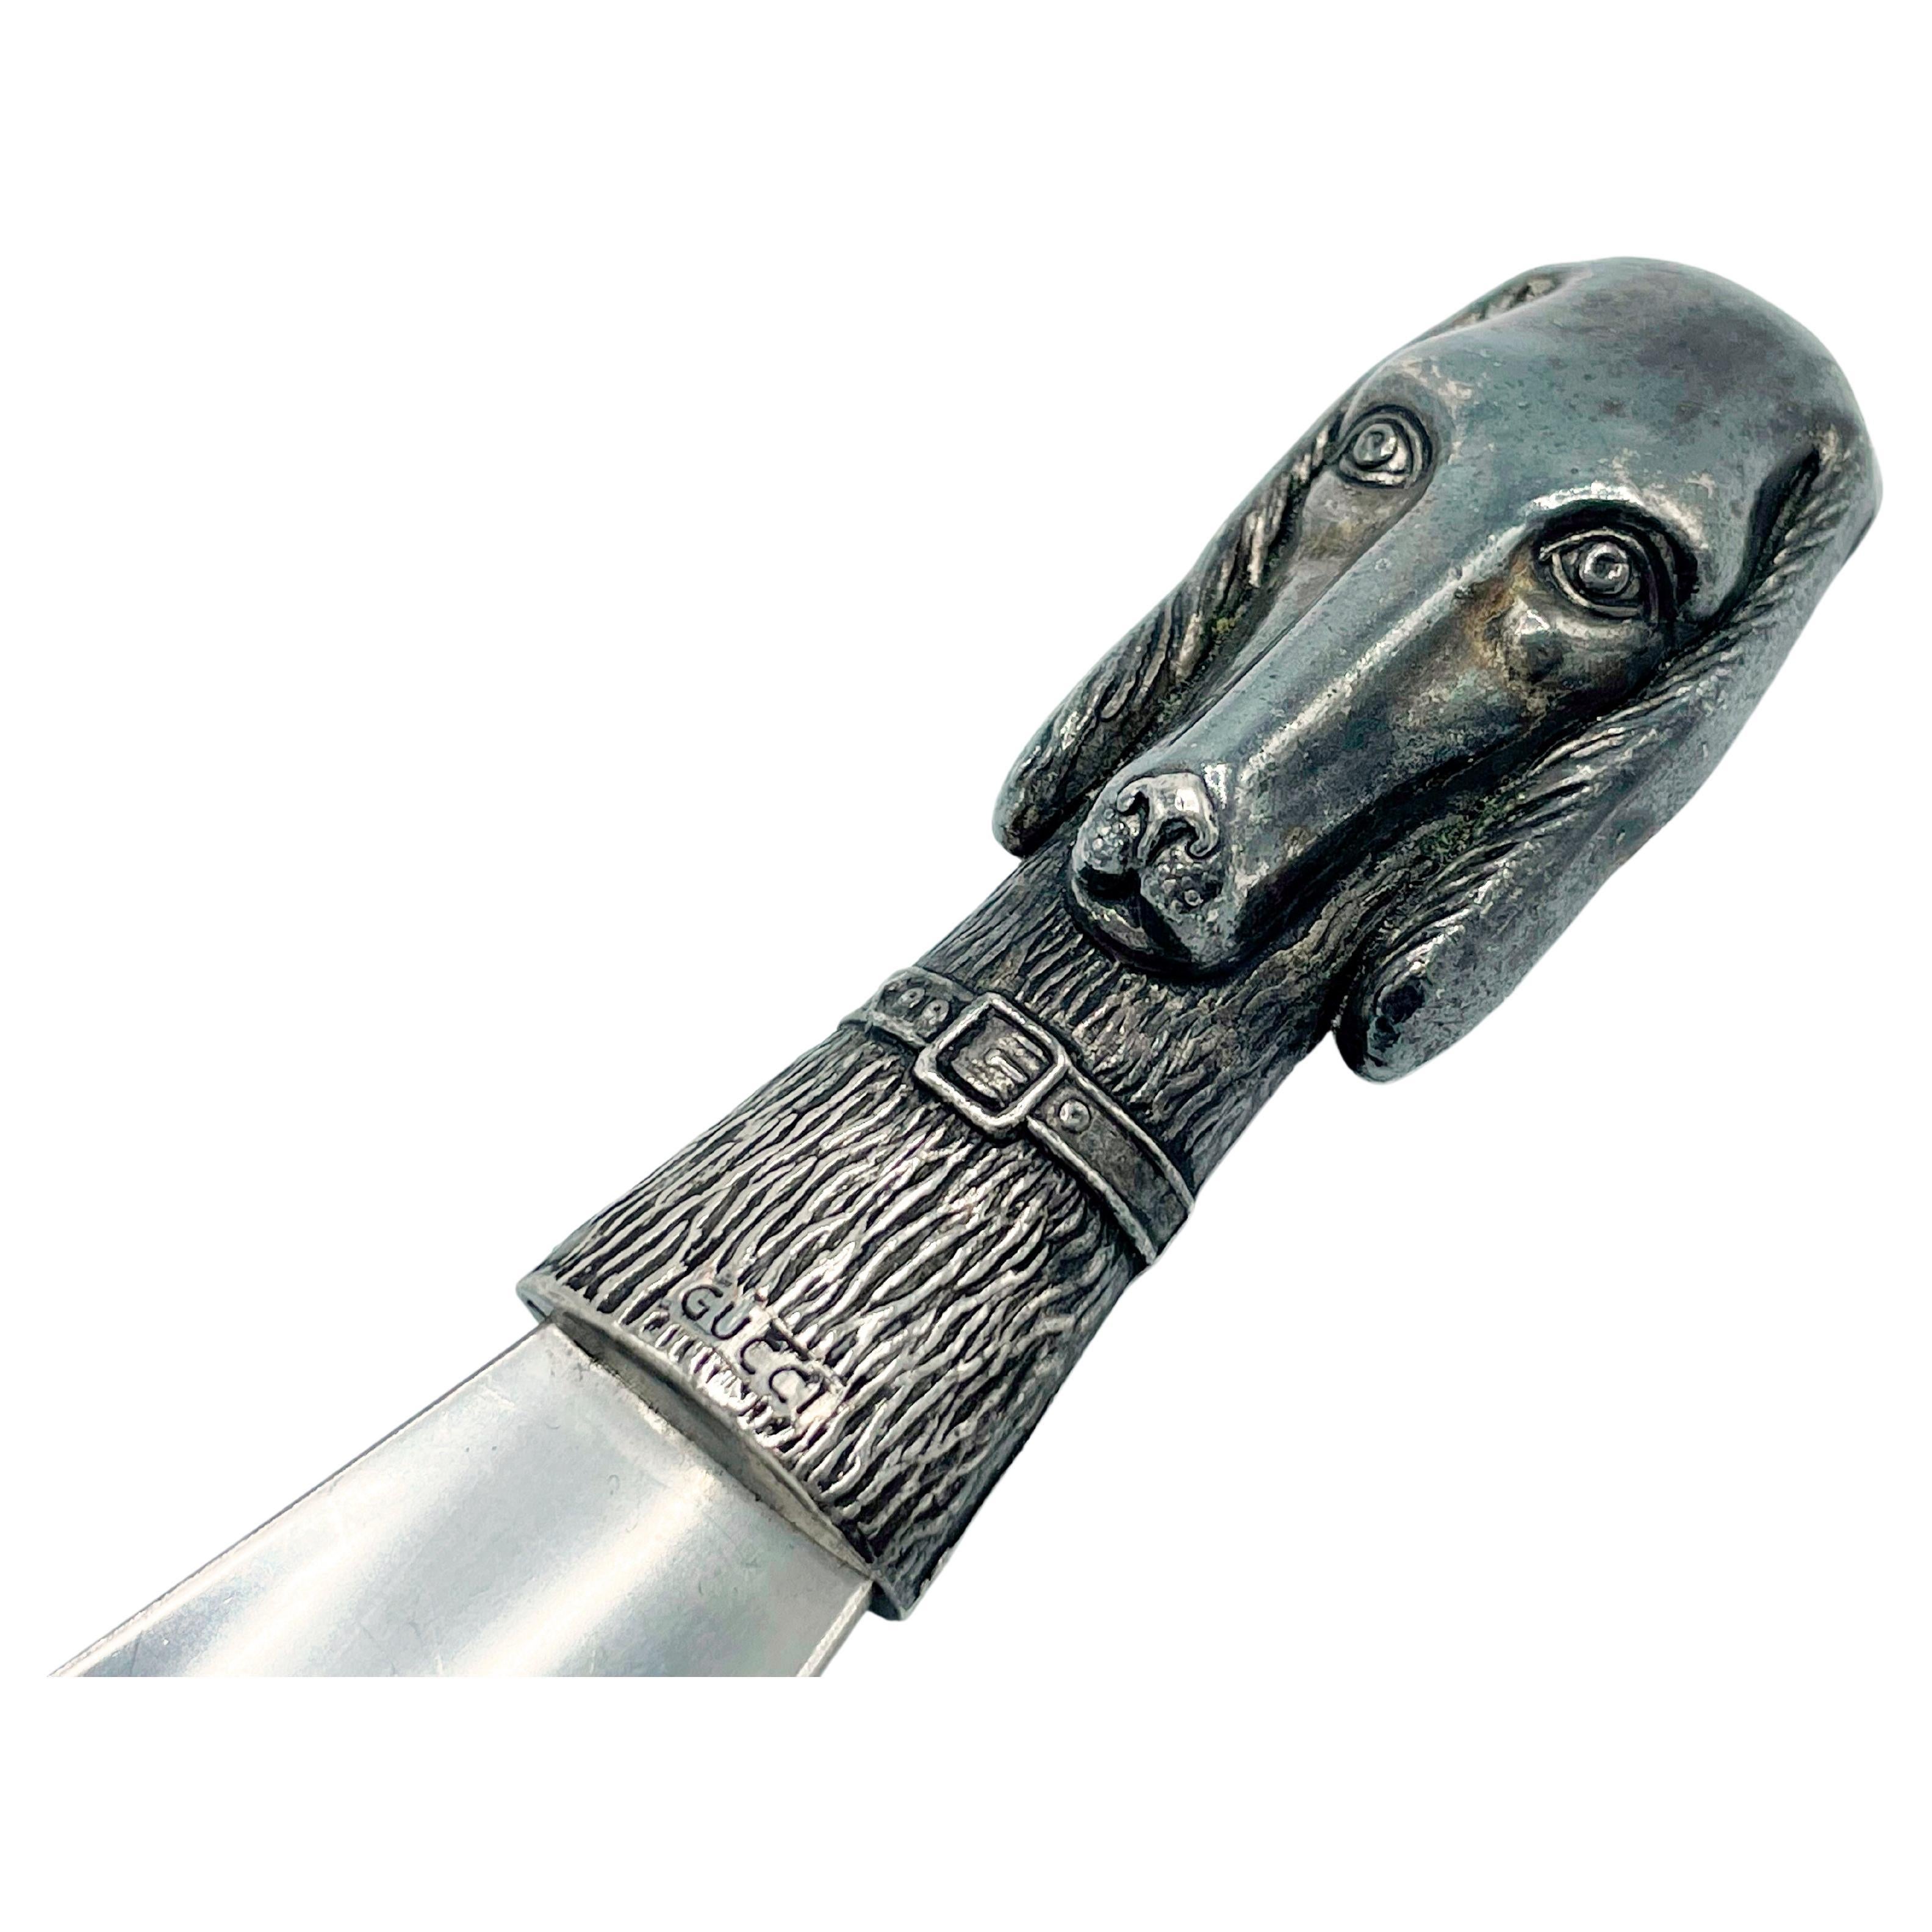 Carved Foot shoehorn gucci dog For Sale